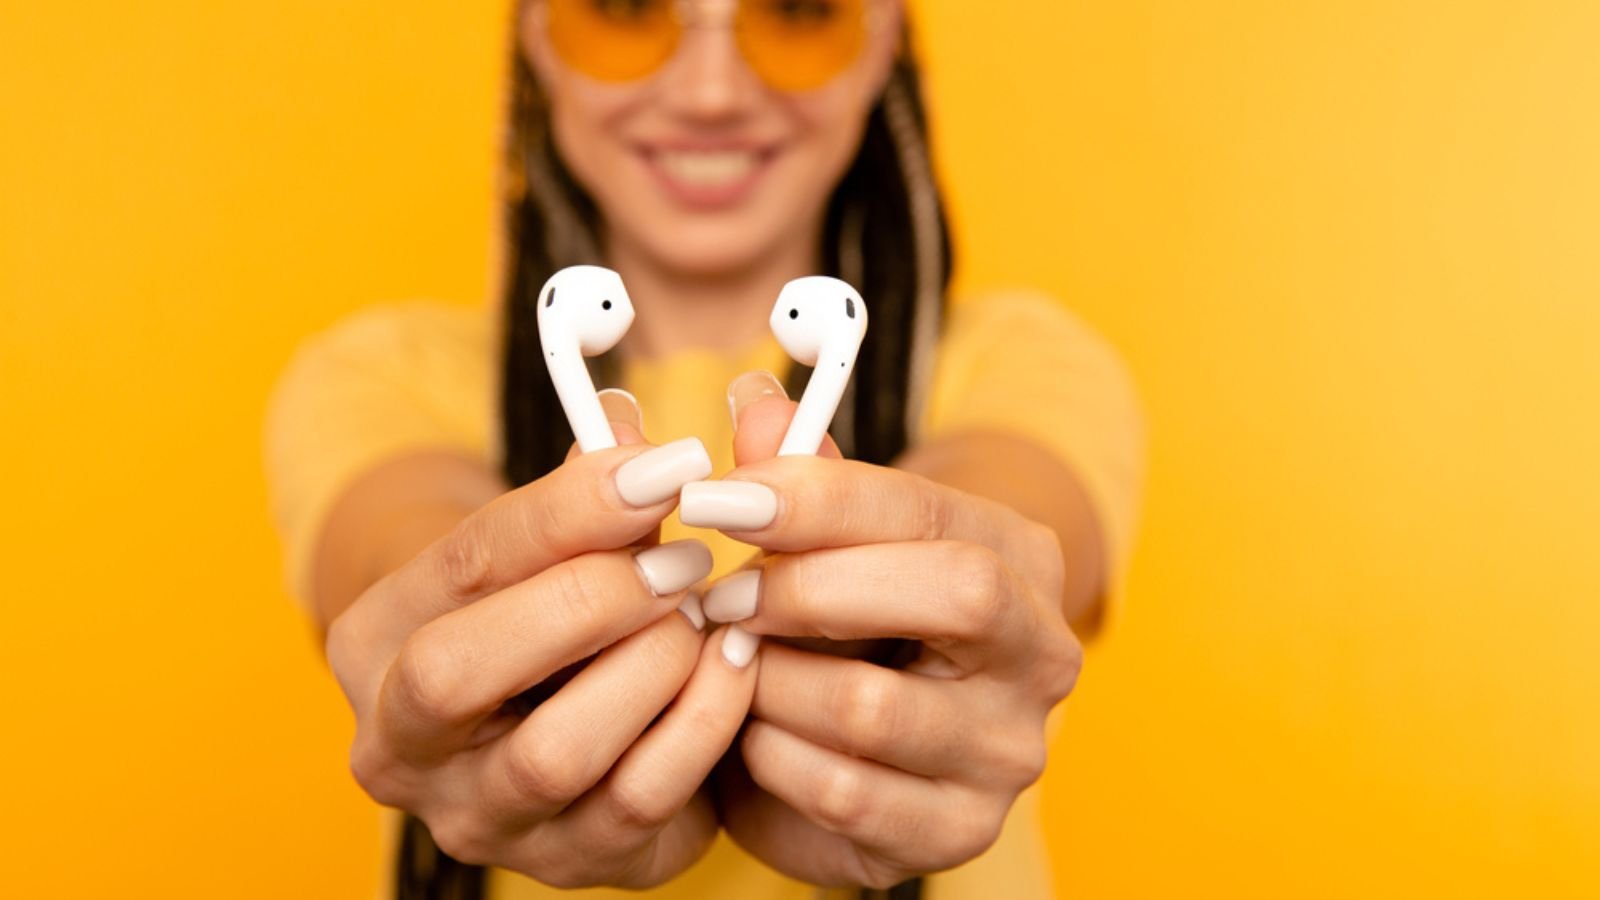 <p>For a generation that is always on the go and always connected, wireless earbuds have become an essential accessory. Whether they’re listening to music, podcasts, or taking calls, many Gen Zers rely on their wireless earbuds to stay entertained and productive throughout the day. With a wide range of styles and price points available, there’s a pair of wireless earbuds for every Gen Zer’s needs and preferences.</p>